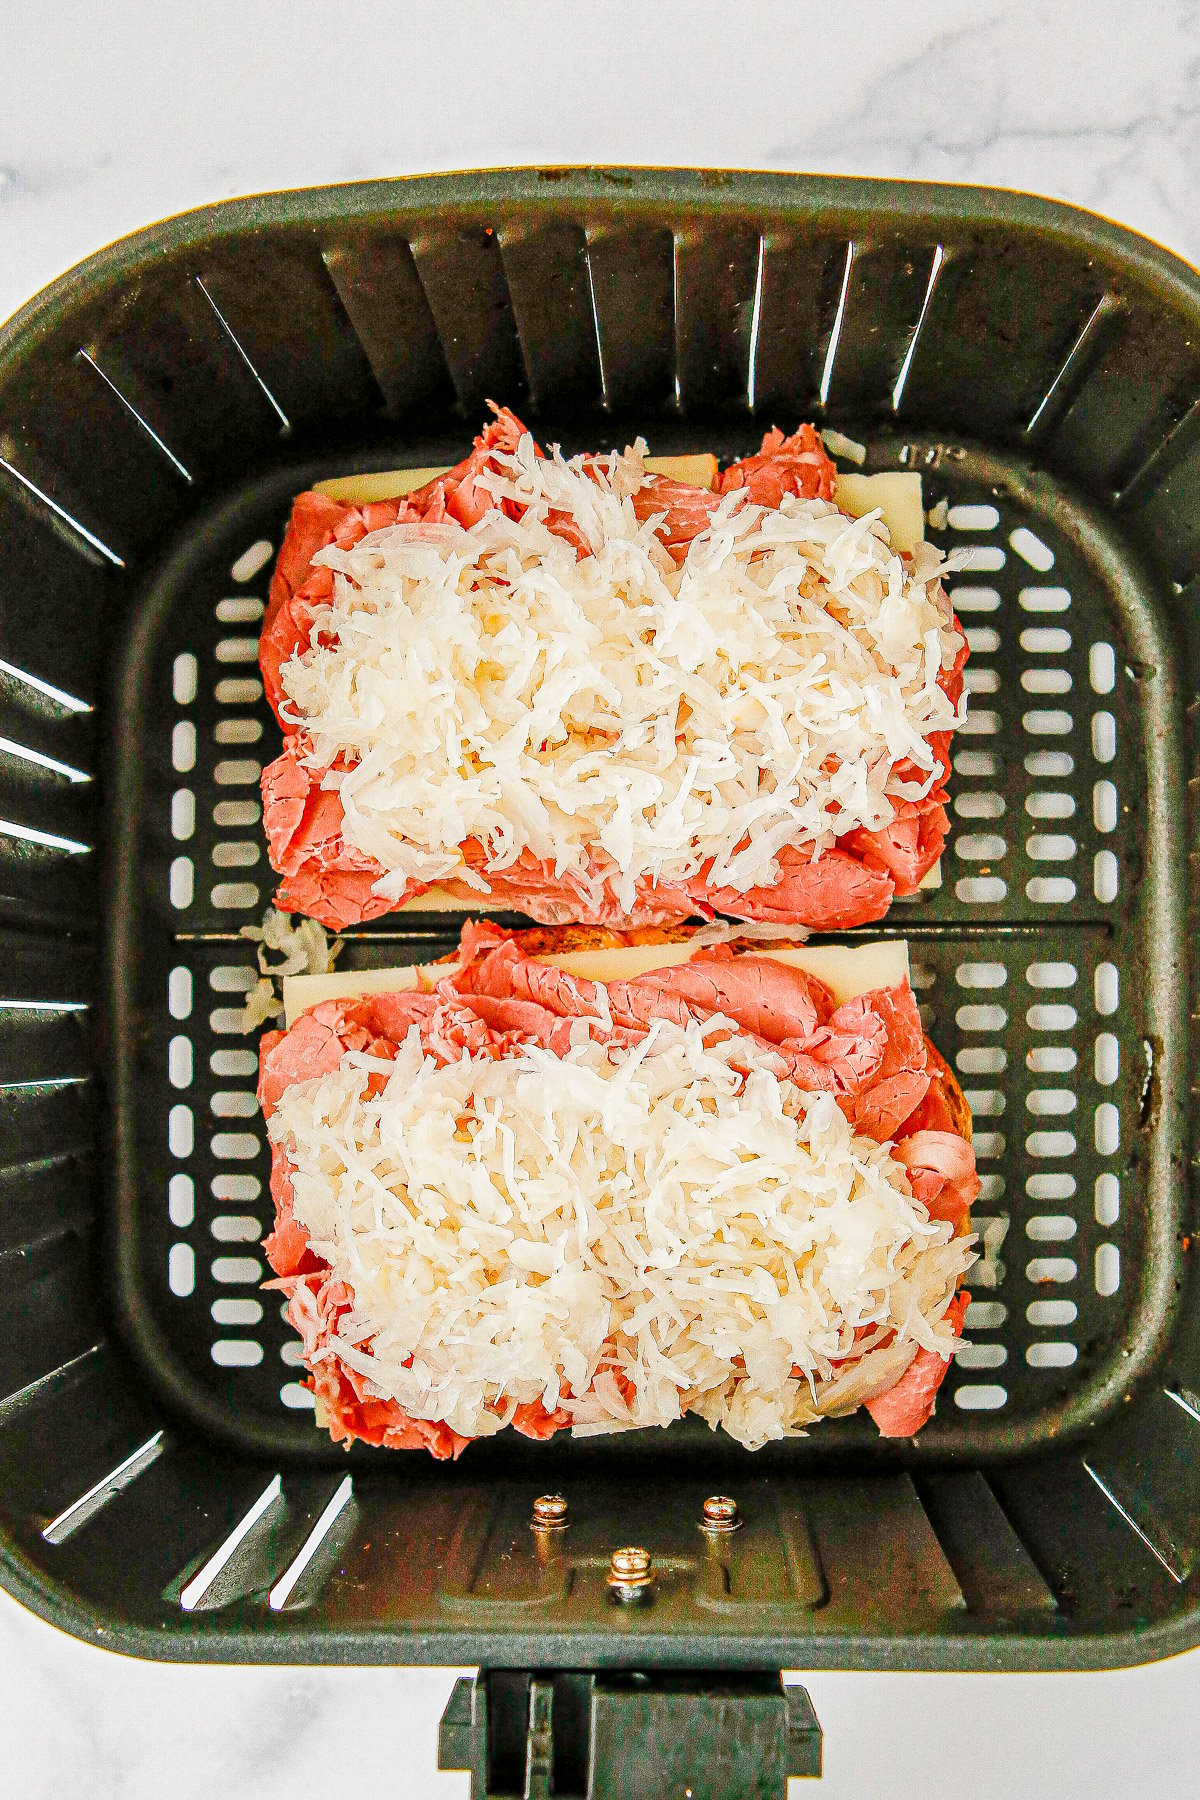 Air Fryer Reuben Sandwiches - Deli-worthy reuben sandwiches at home complete with rye bread, Russian dressing, melted Swiss cheese, and plenty of corned beef! The air fryer helps get the bread extra crispy but stovetop cooking directions are also provided. Get ready because these sandwiches are generously sized and SO GOOD!